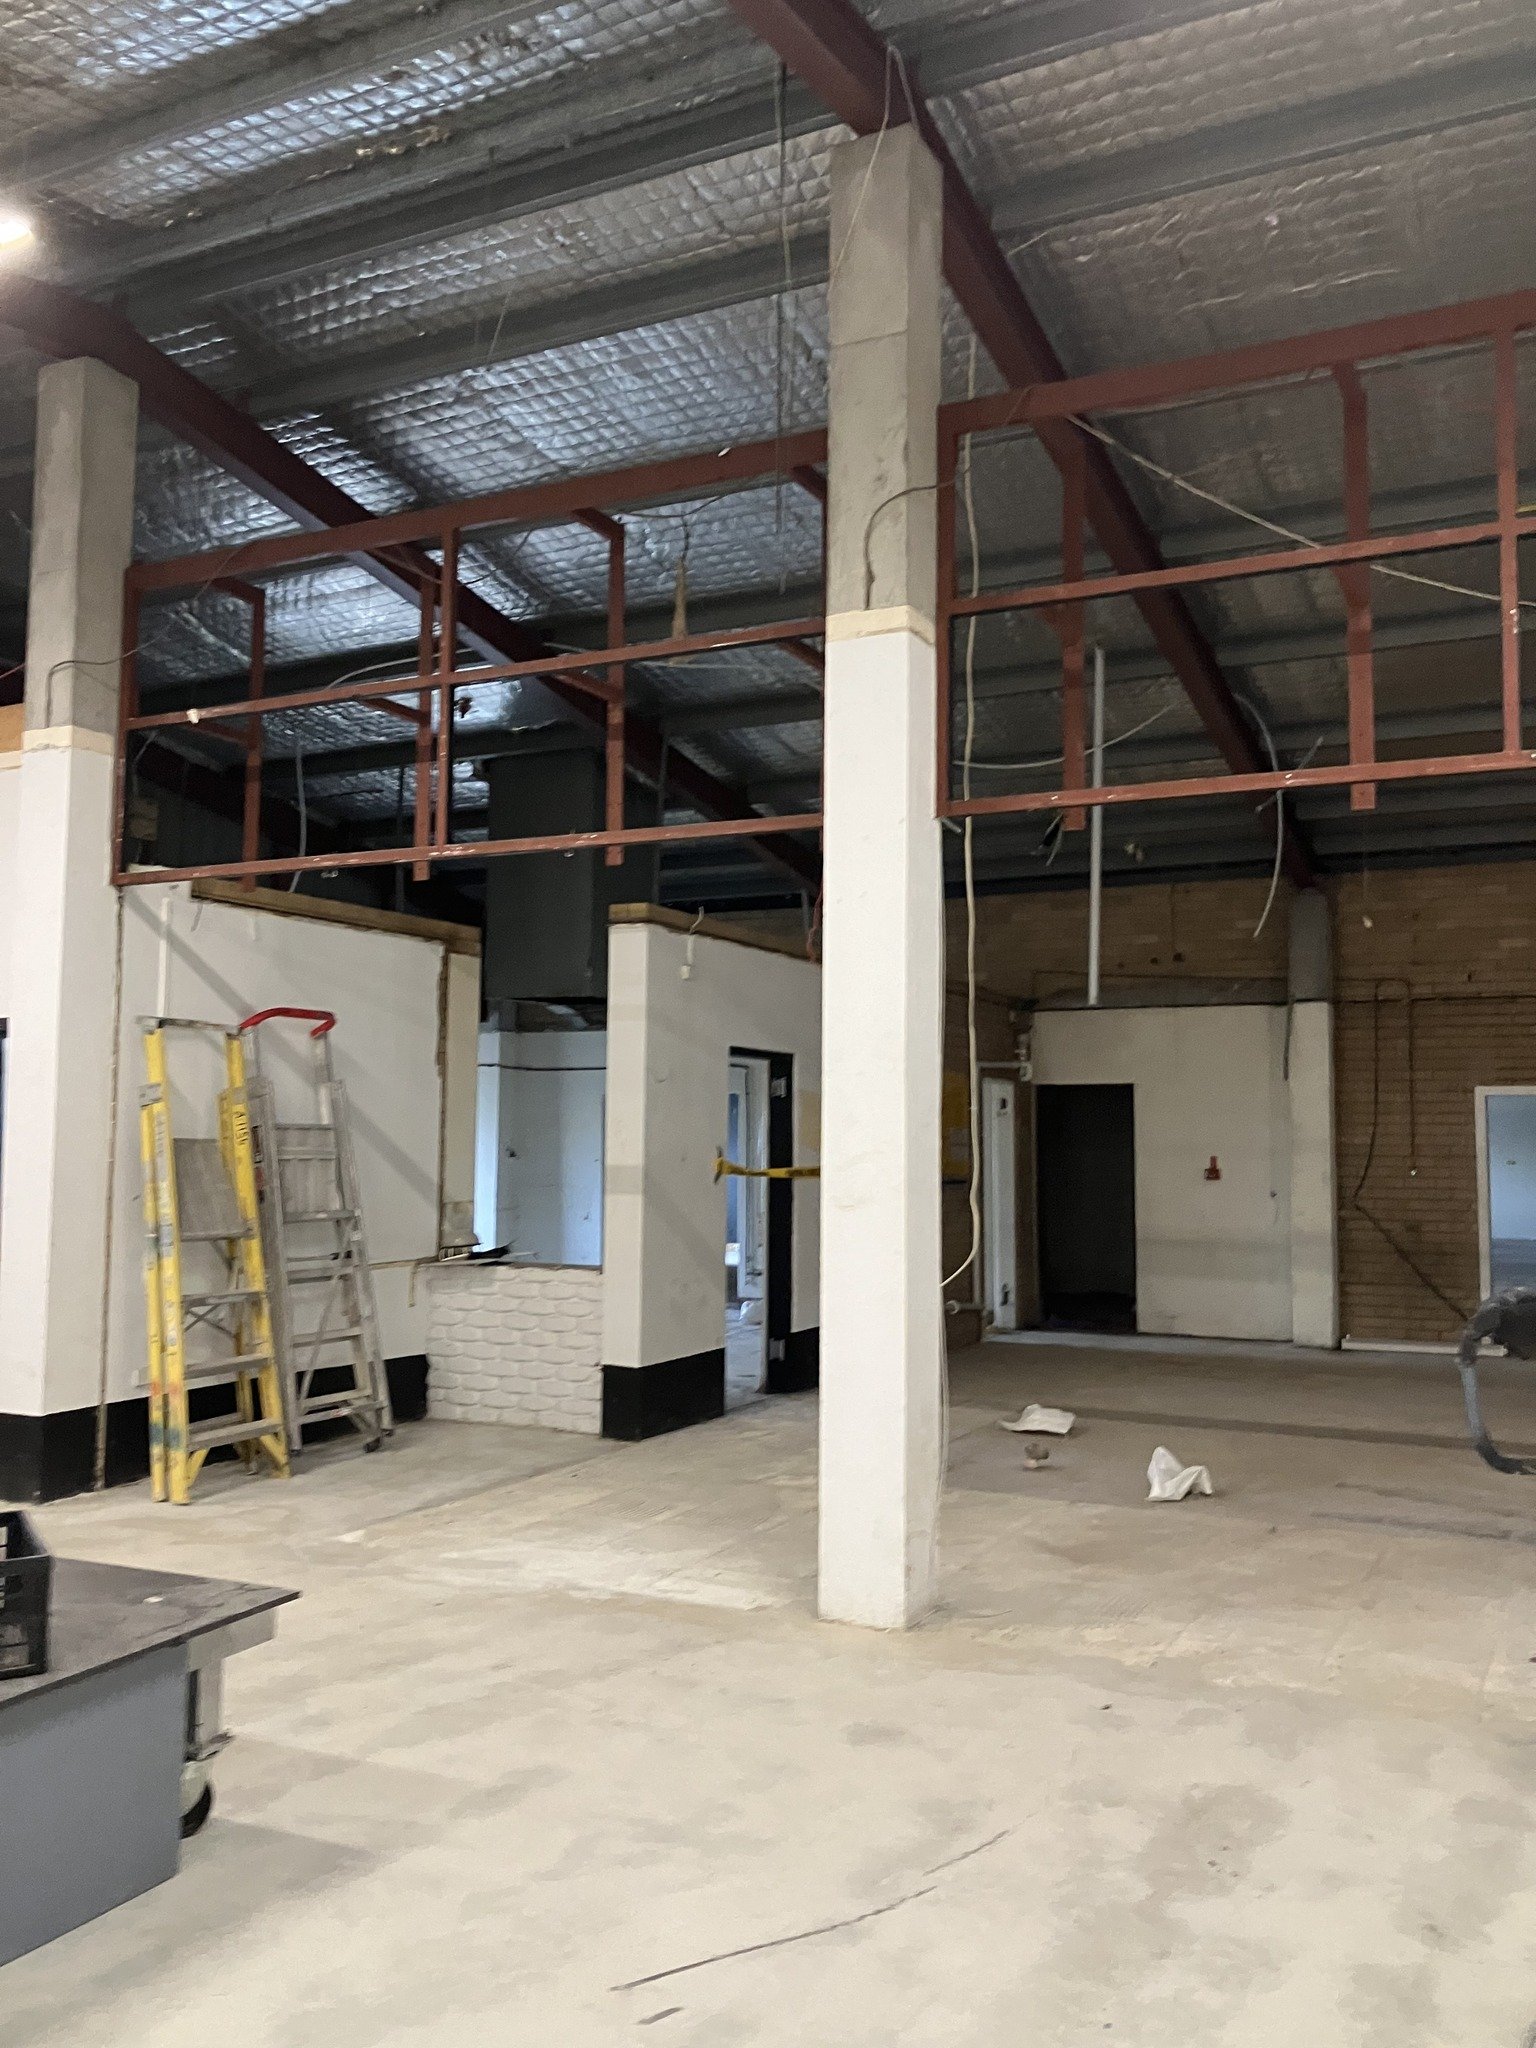 CLUBHOUSE RENOVATION UPDATE 🏁

Quick update on the club refurbishment works from the project team. The contractor has started on site and is well into demolition. Included are a few photos of what the club looks like now as it is prepared for the ne